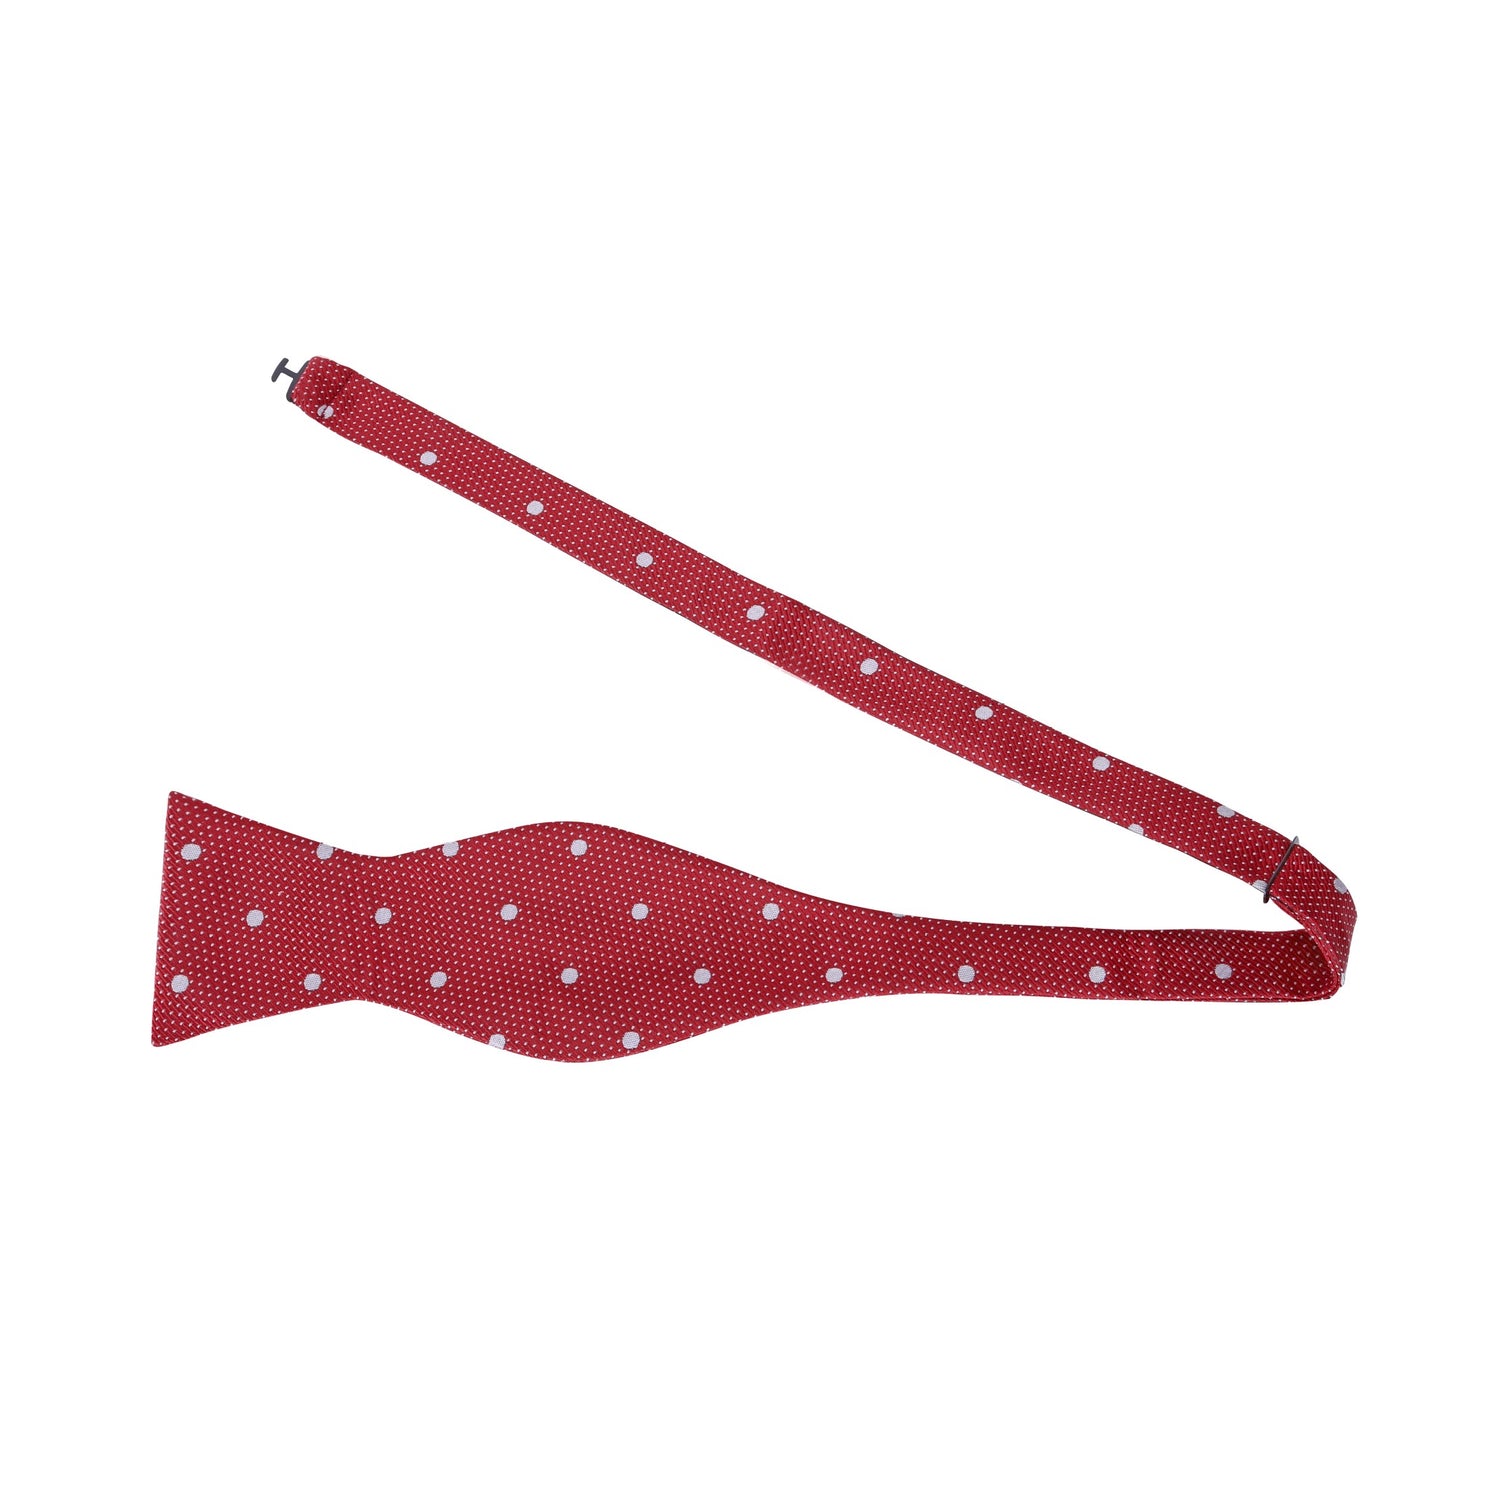 A Red, White Polka Dot Pattern Self Tie Bow Tie Untied